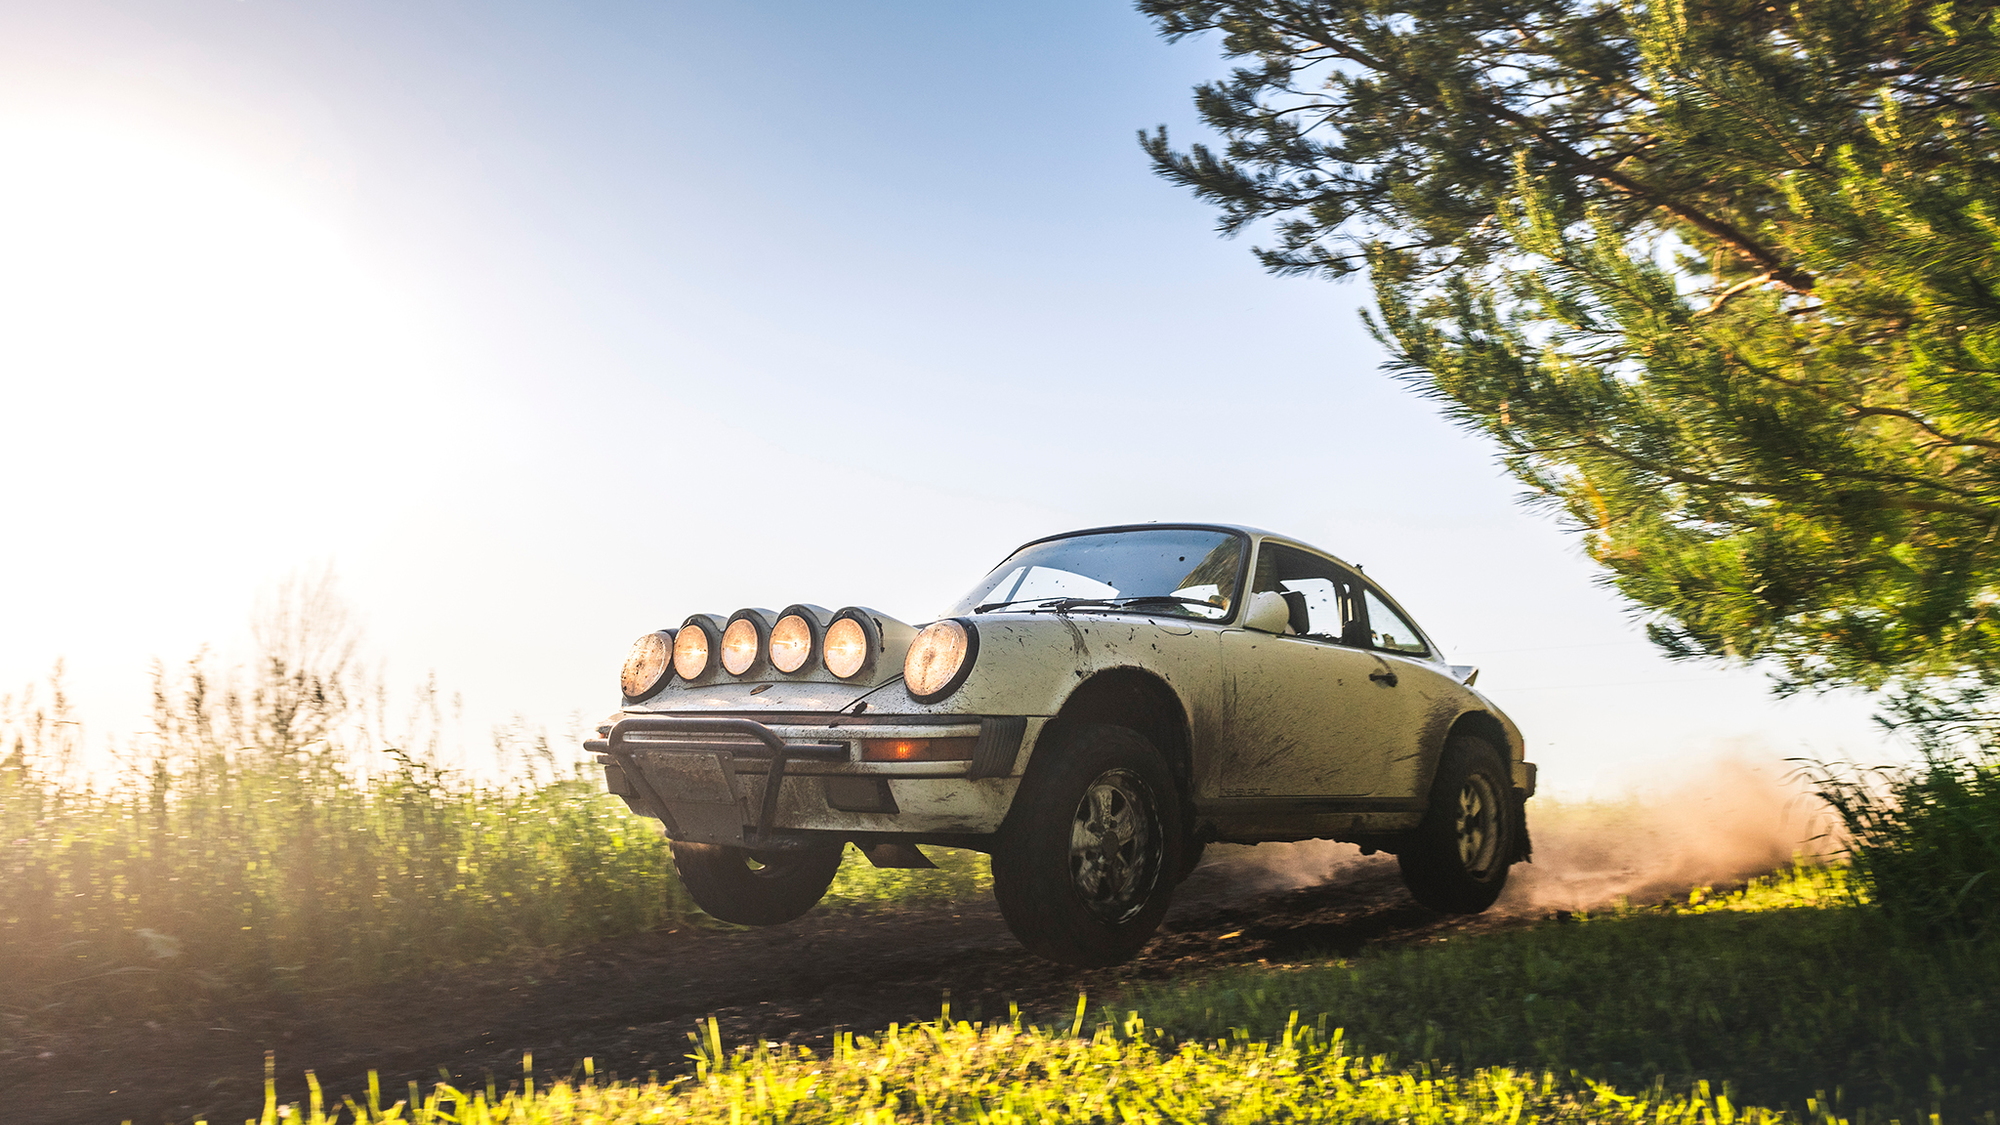 The Keen Project Safari 911 No. 2, photo by Alex Bellus